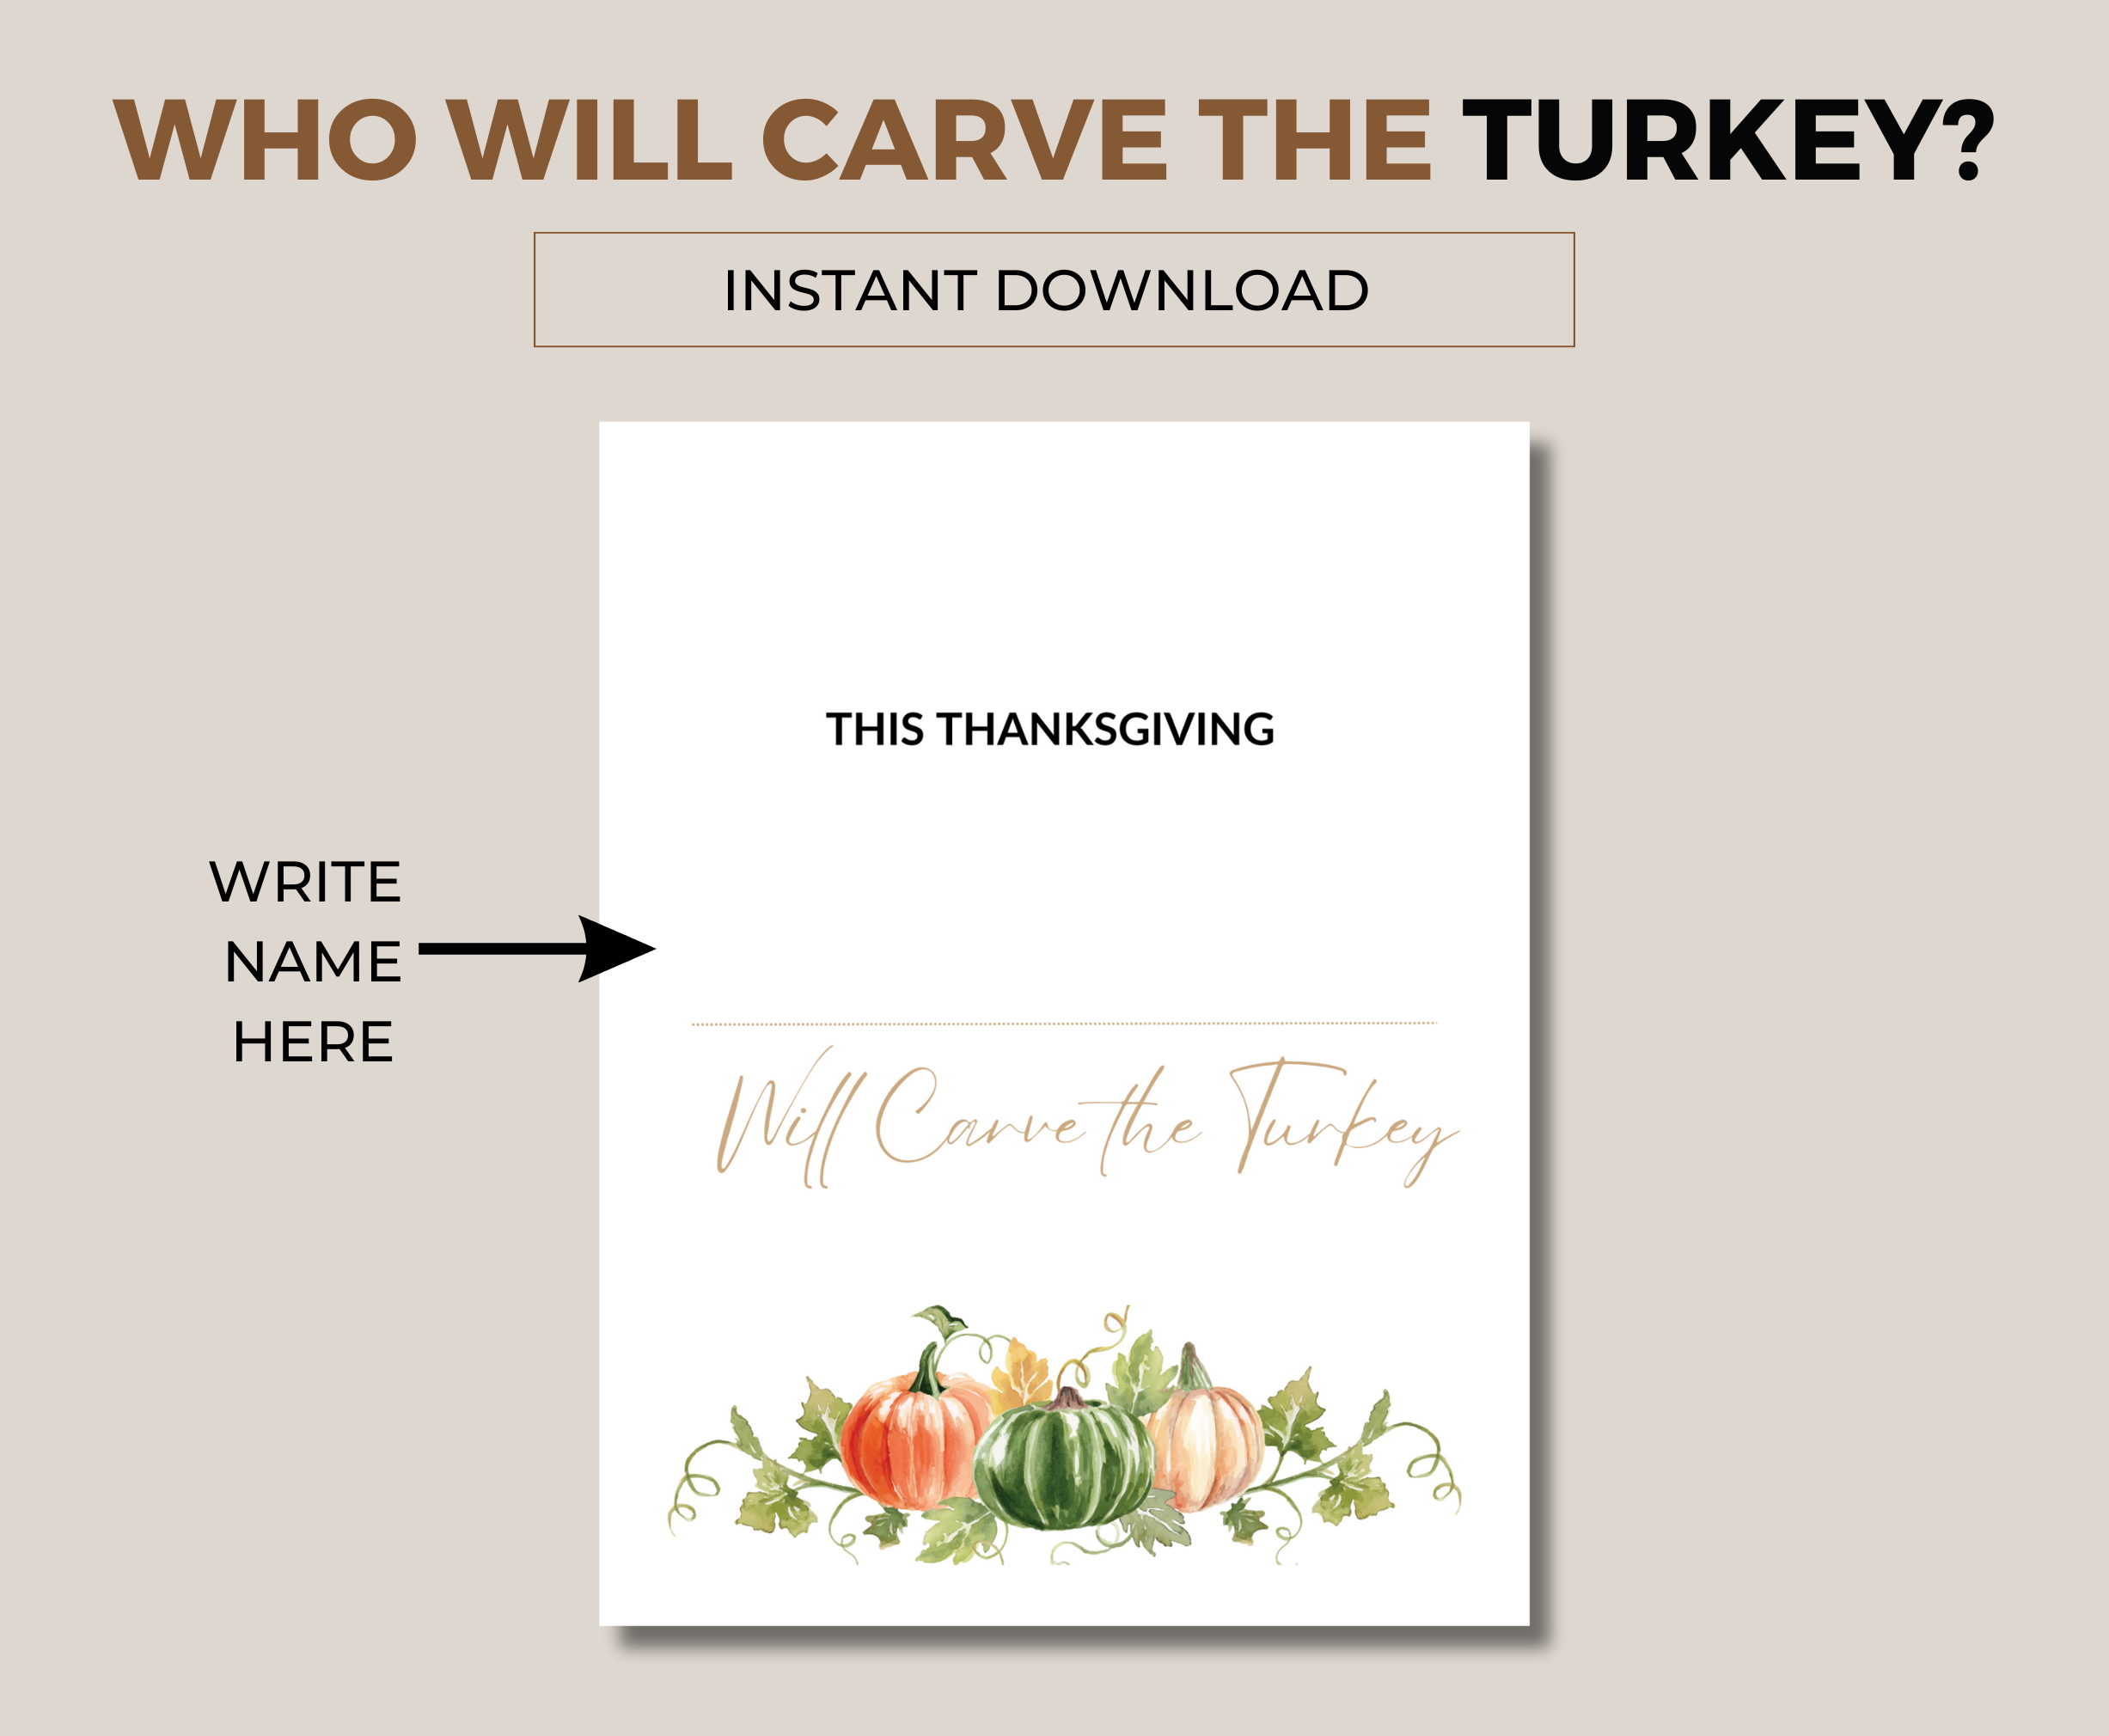 Carve the Turkey sign